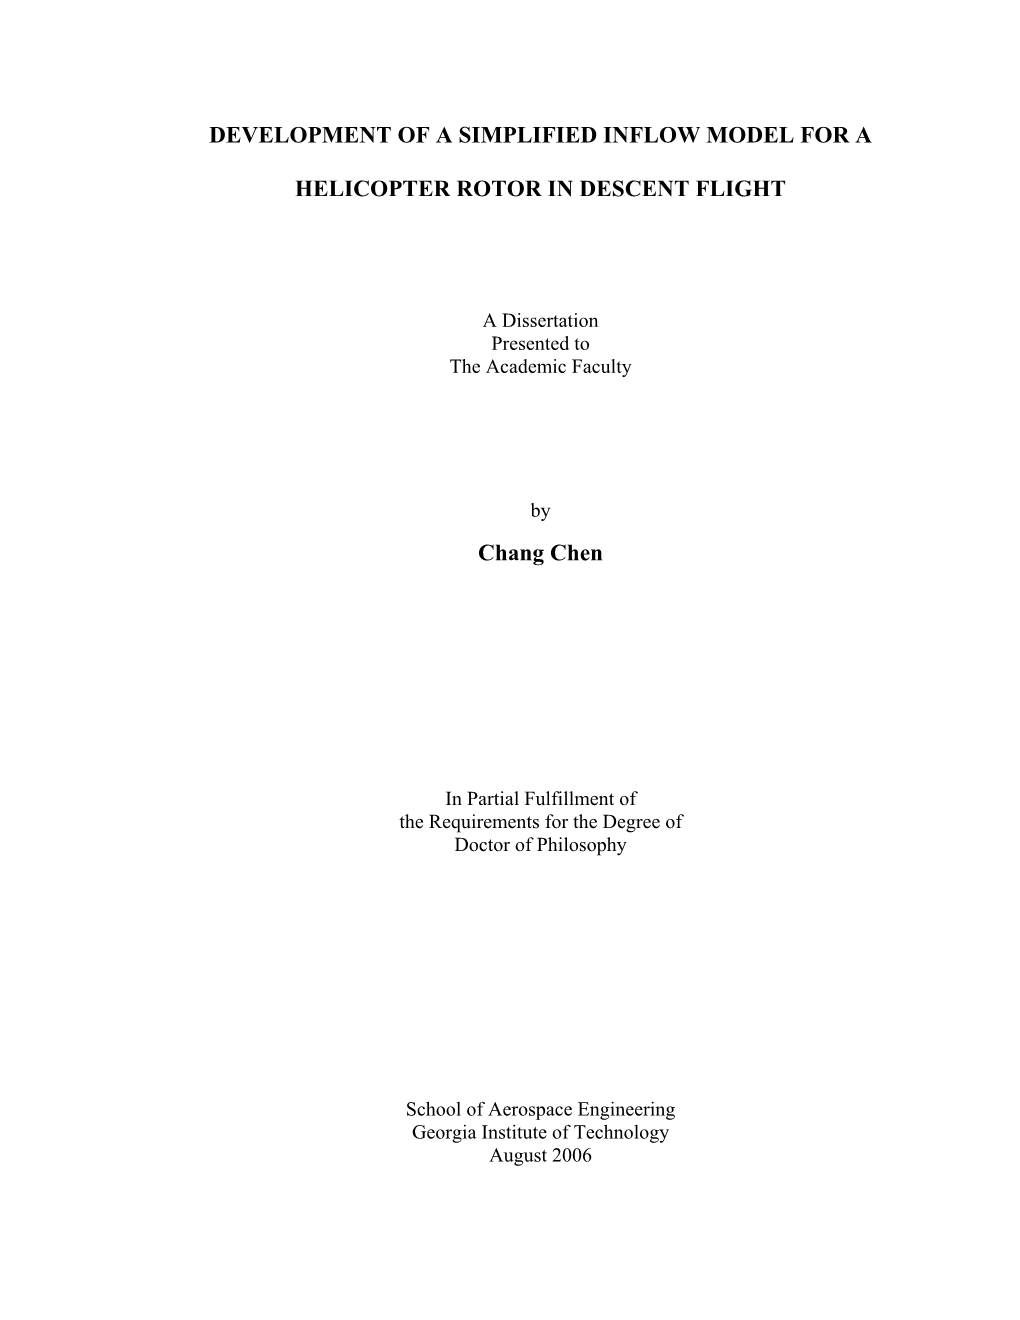 DEVELOPMENT of a SIMPLIFIED INFLOW MODEL for a HELICOPTER ROTOR in DESCENT FLIGHT Chang Chen